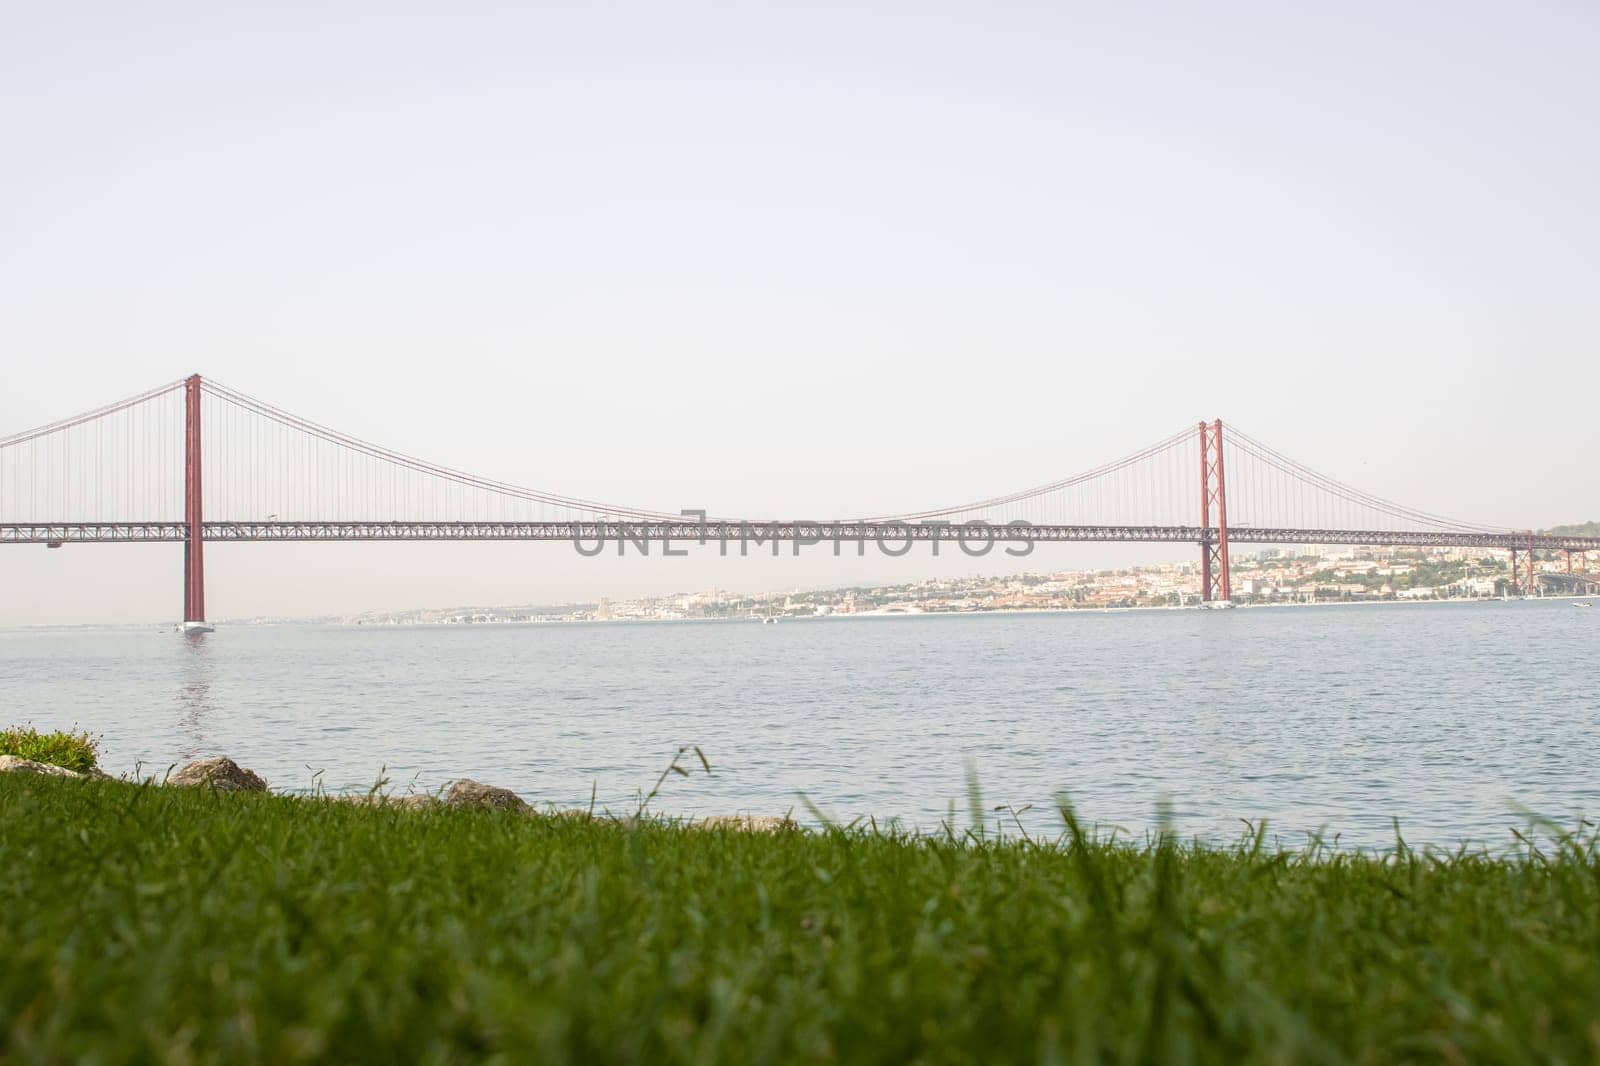 Bridge of 25 april - view of Lisboa Harbor with vessels and Port cranes, day